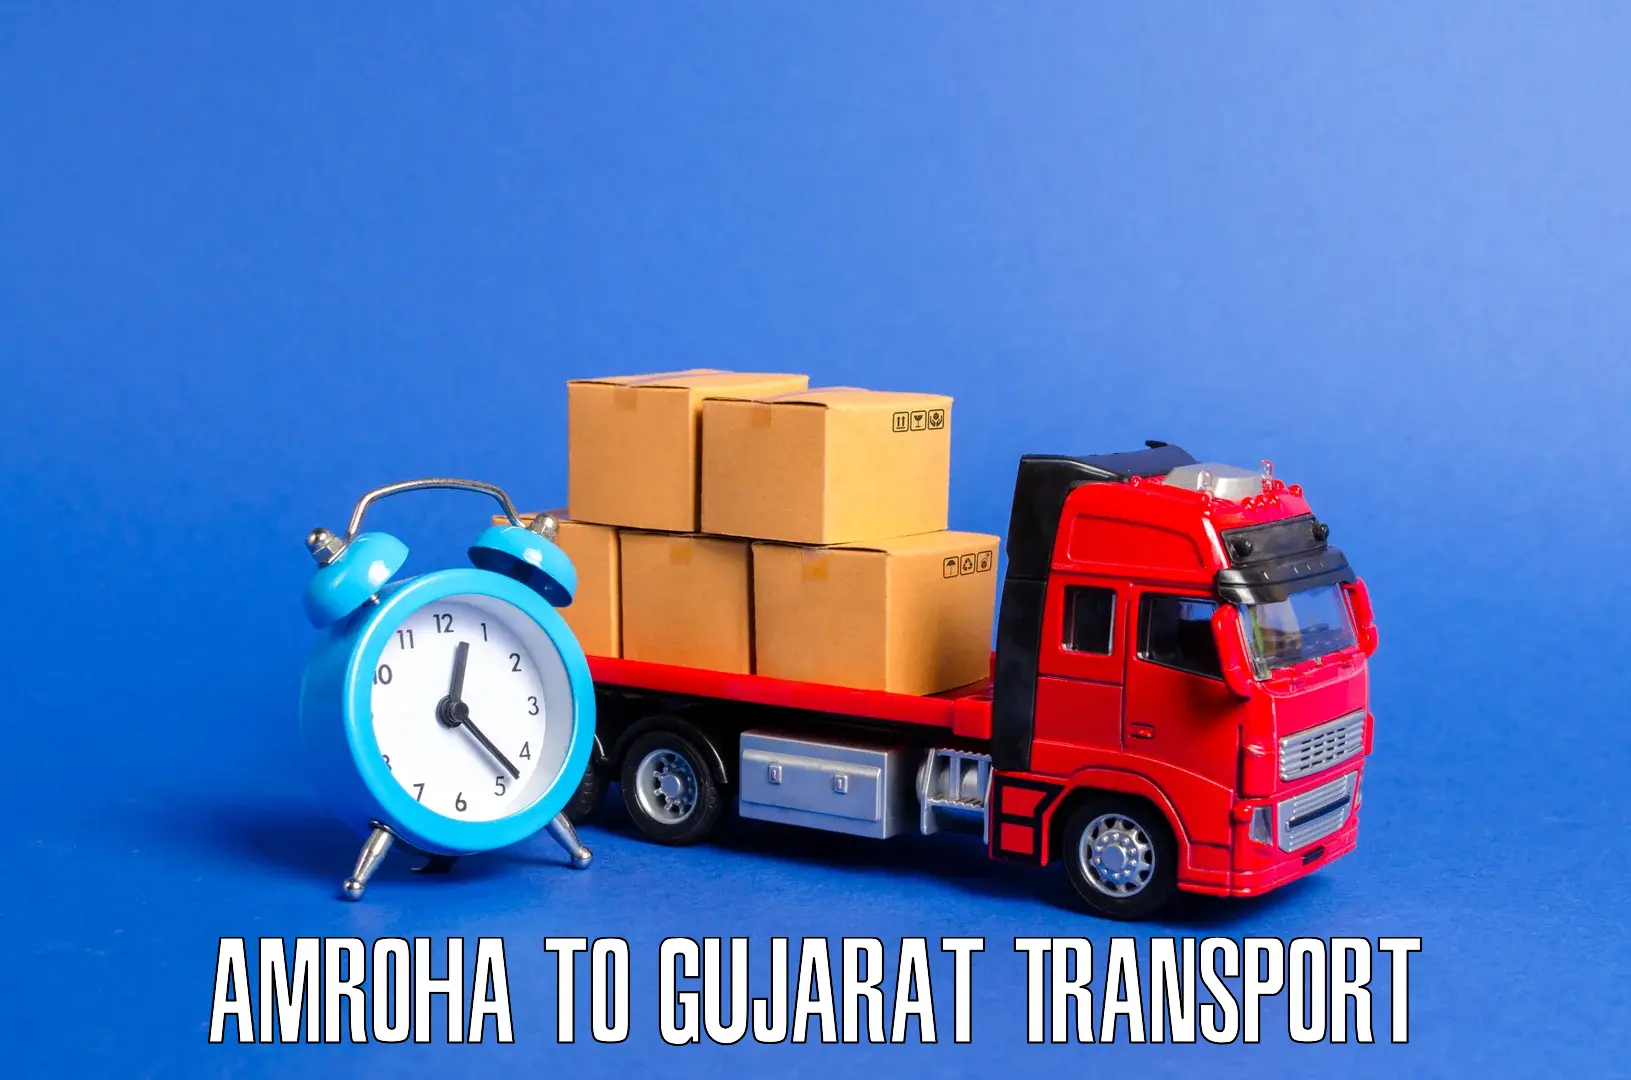 Nearby transport service Amroha to Ankleshwar